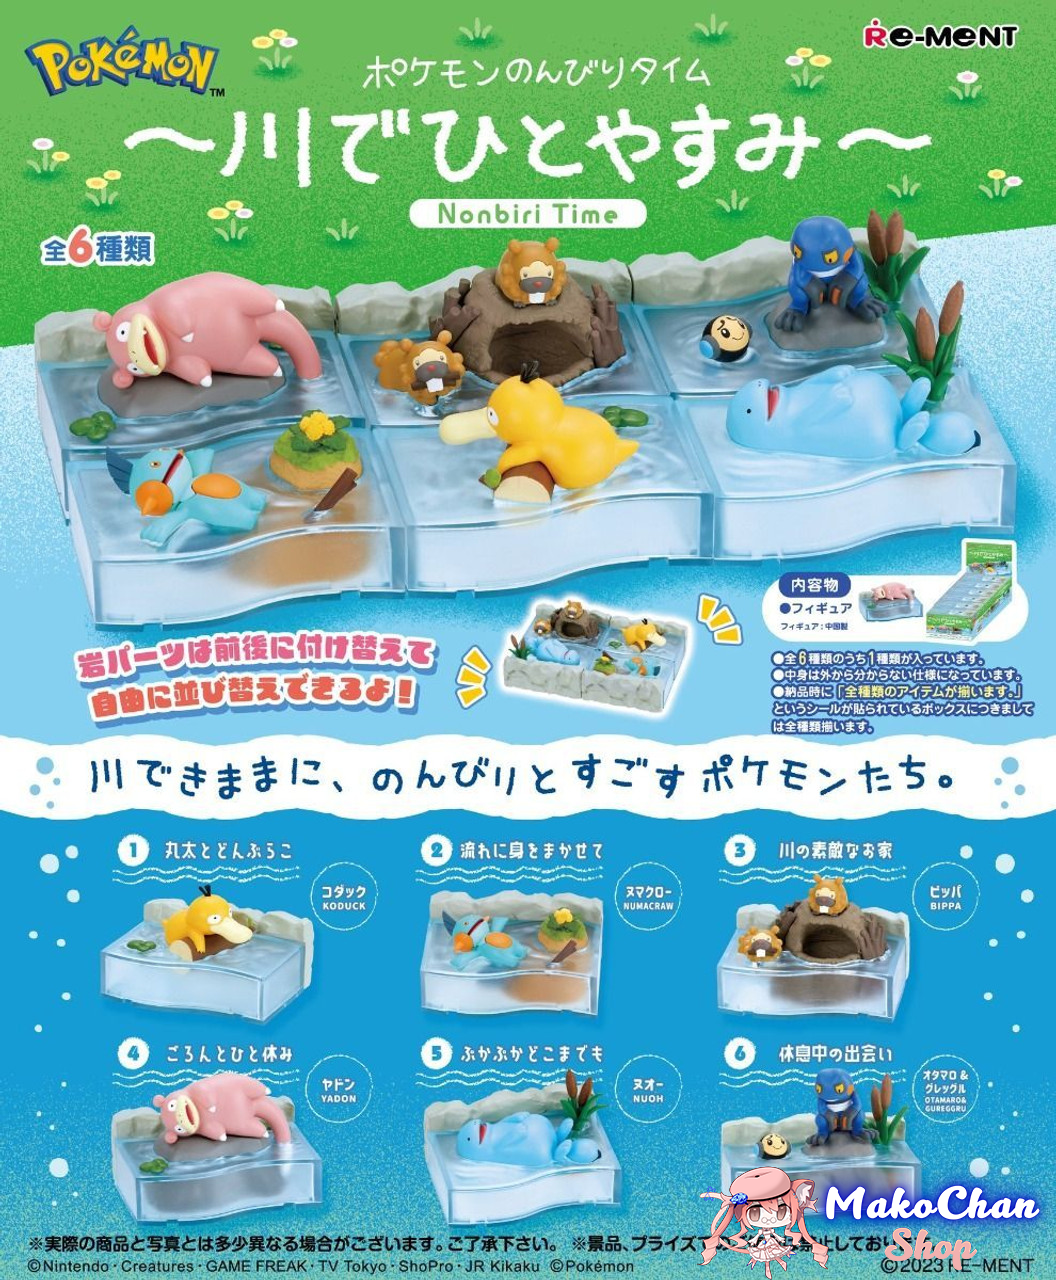 Re-ment Pokemon Chill Time - A Peaceful Moment by The River (pre-order)